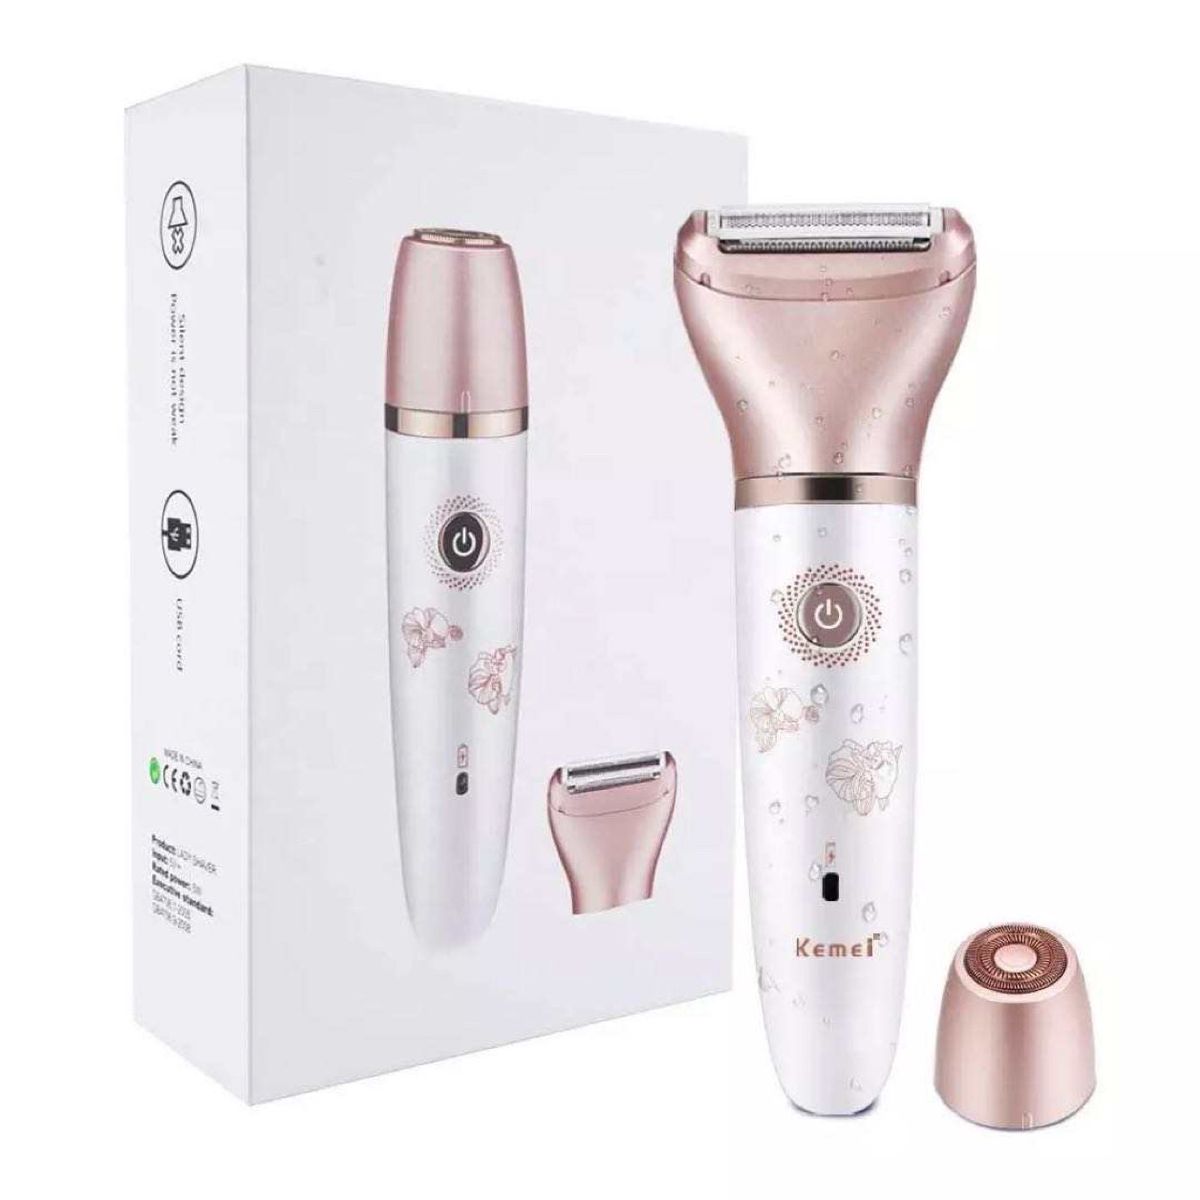 Electric hair remover/shaver 2 in 1 | Buy Online in South Africa |  